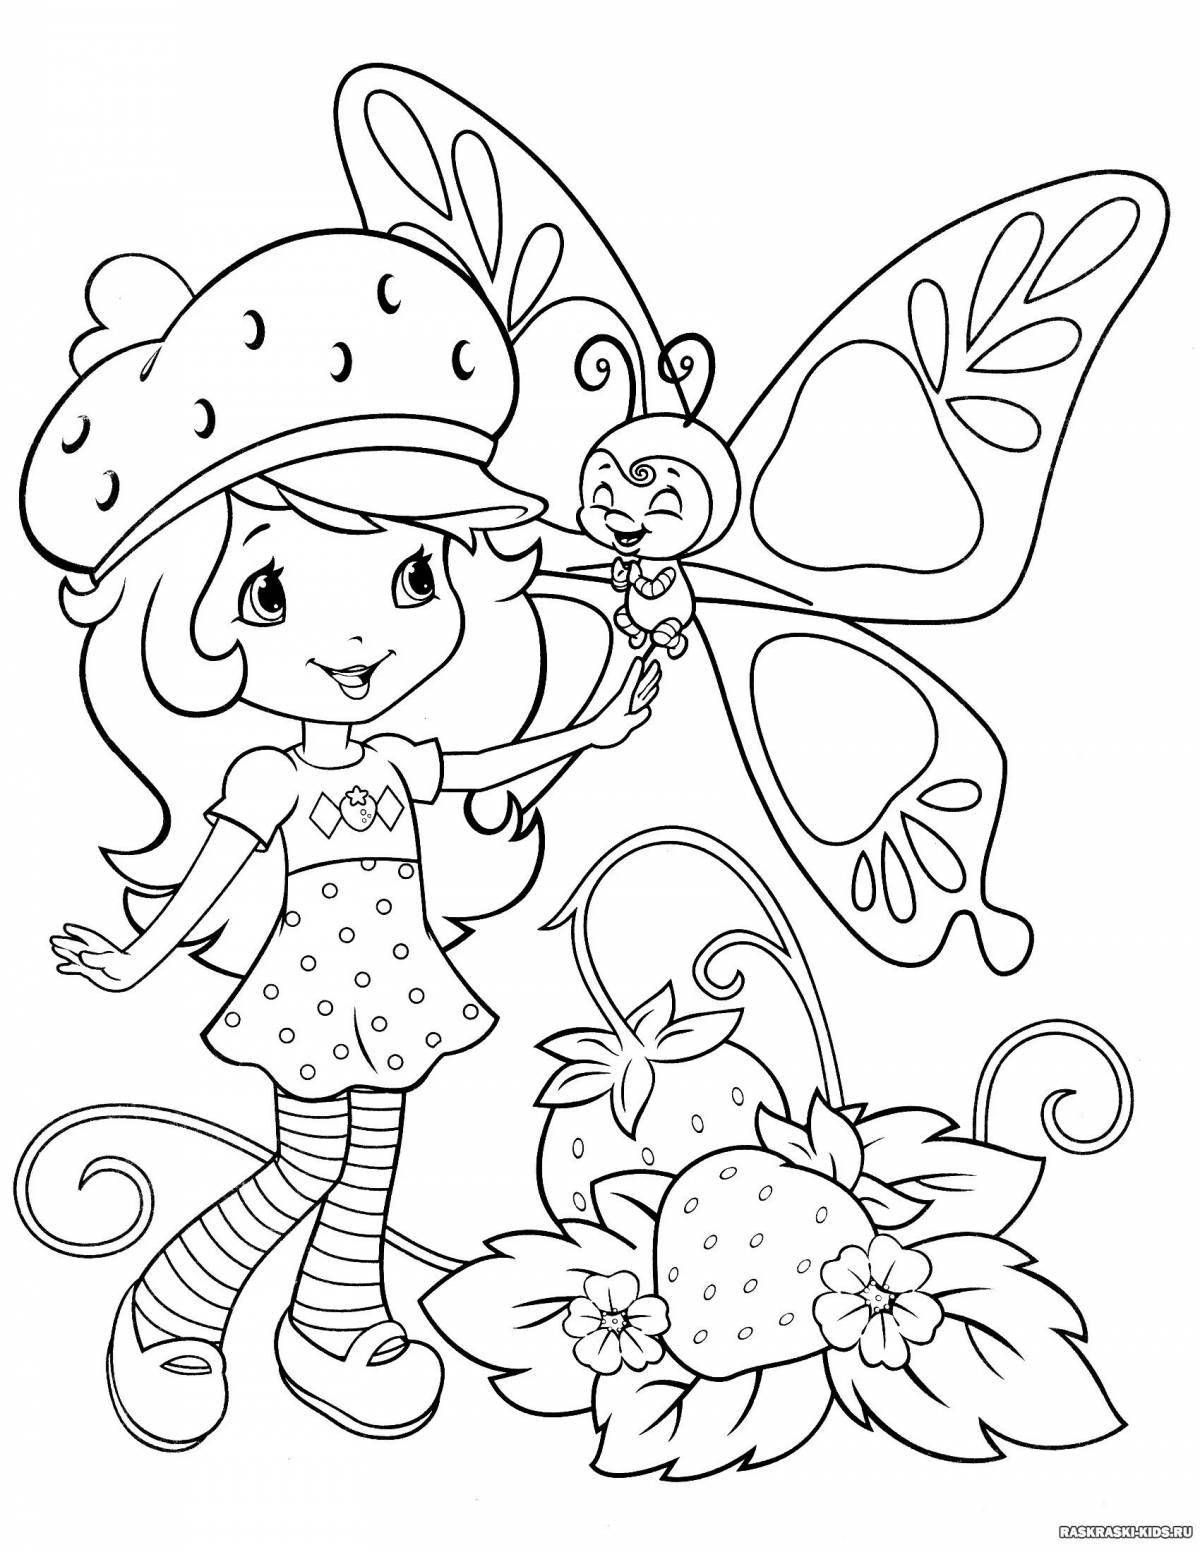 Fabulous coloring page for girls 6 7 years old